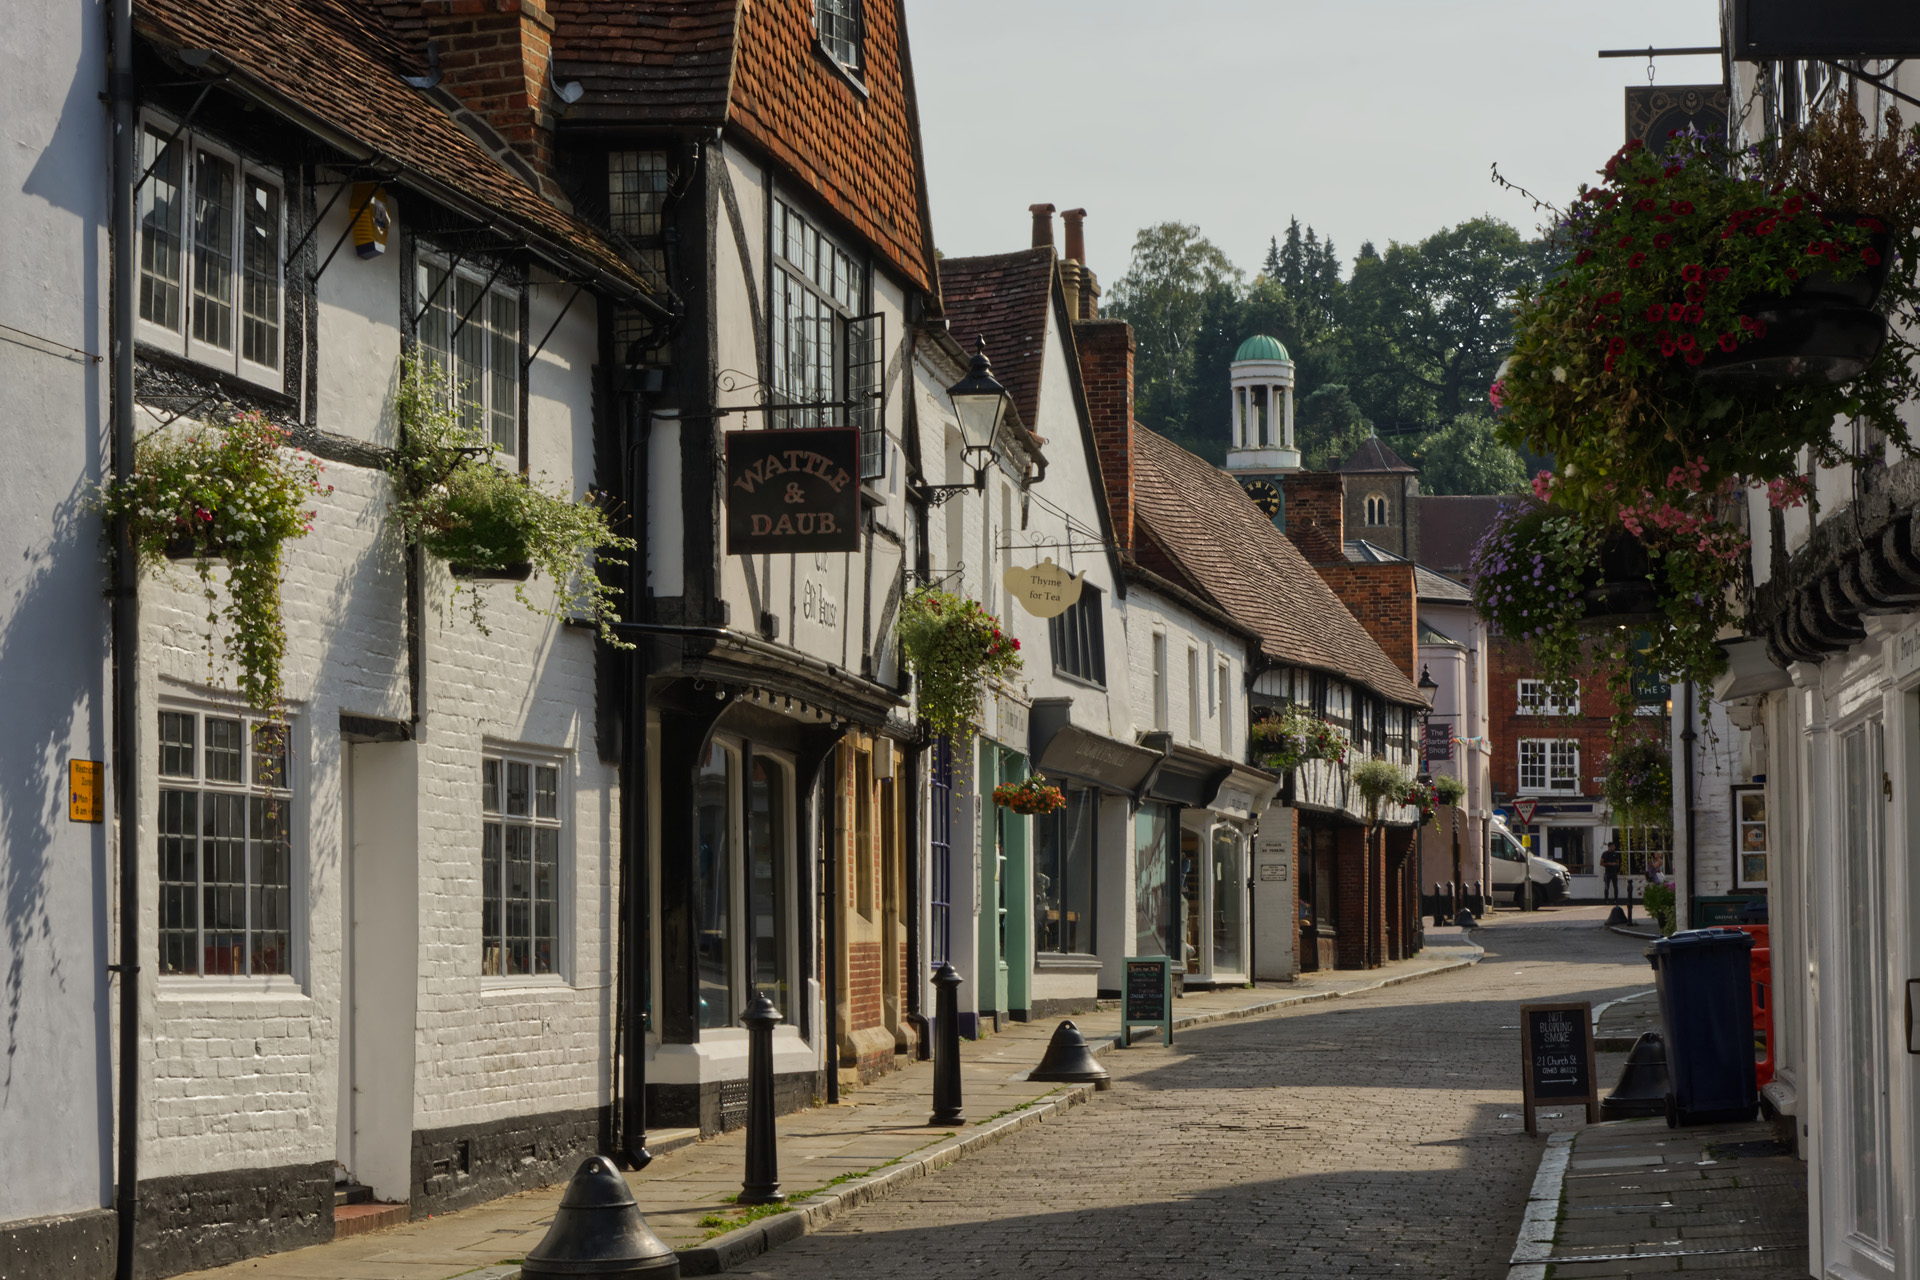 Mixed architecture of old buildings in shopping street, Godalming, Surrey, England